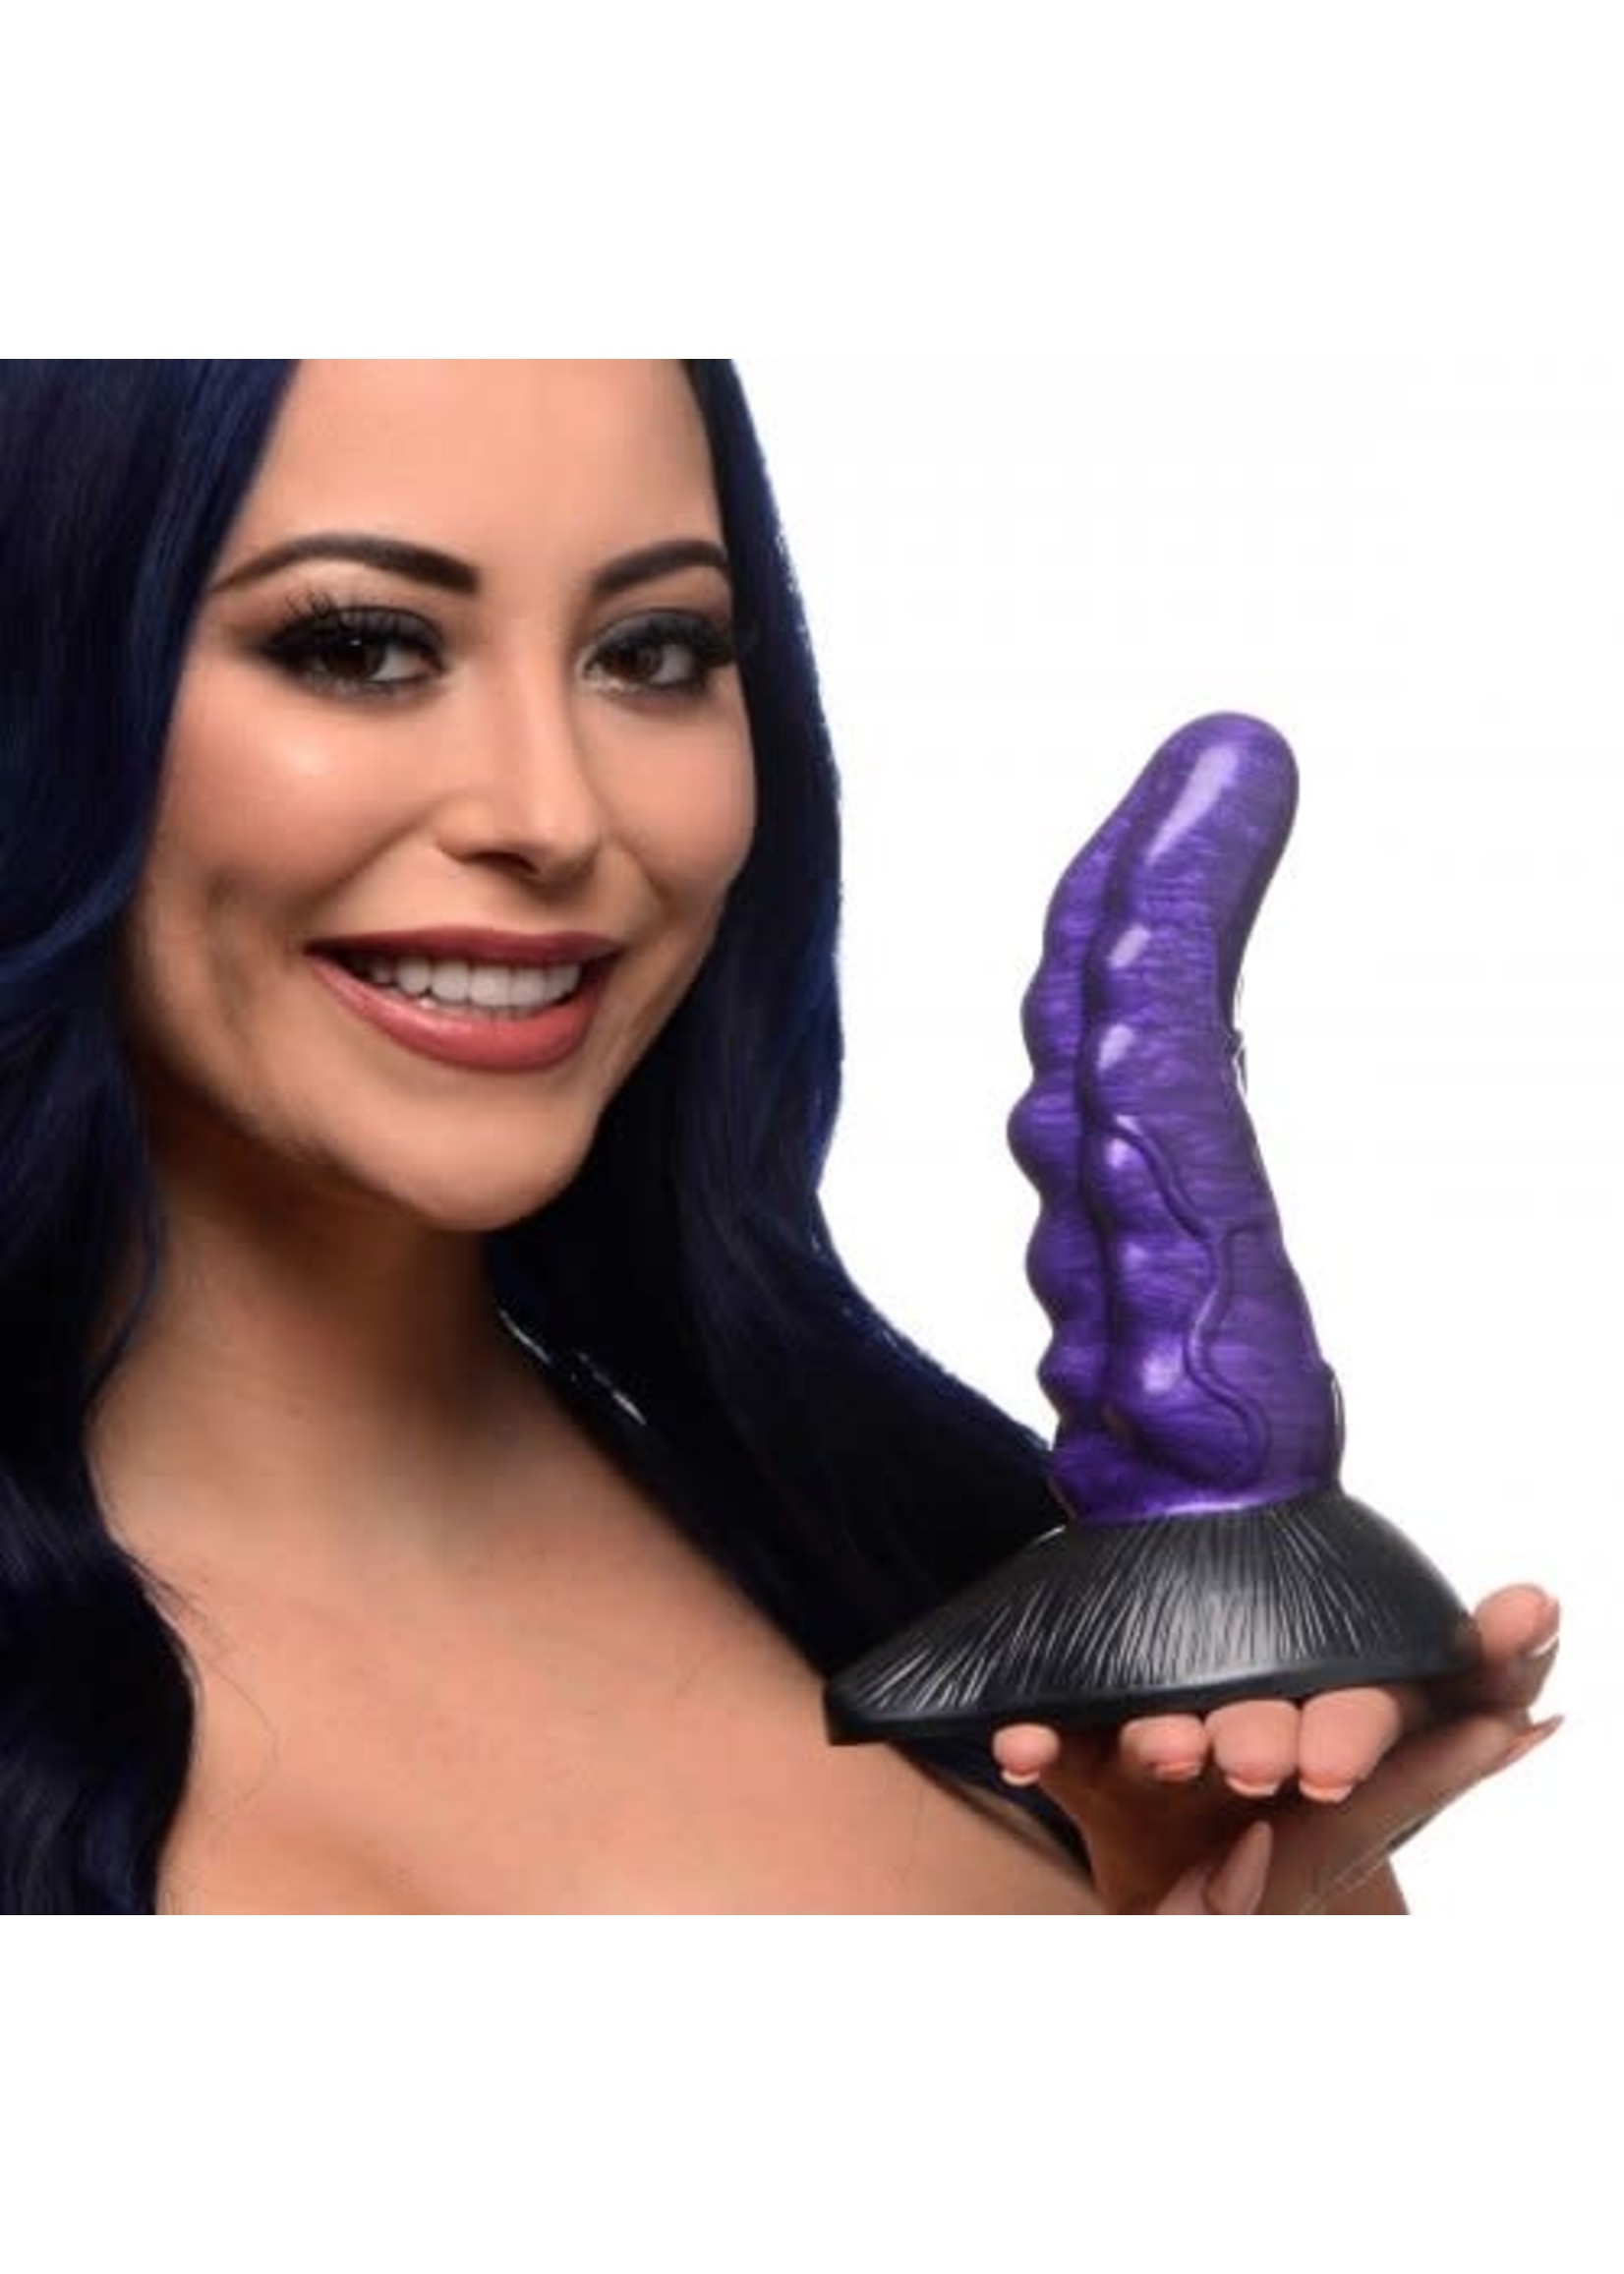 XR Brands Orion Invader Veiny Space Alien Silicone Dildo